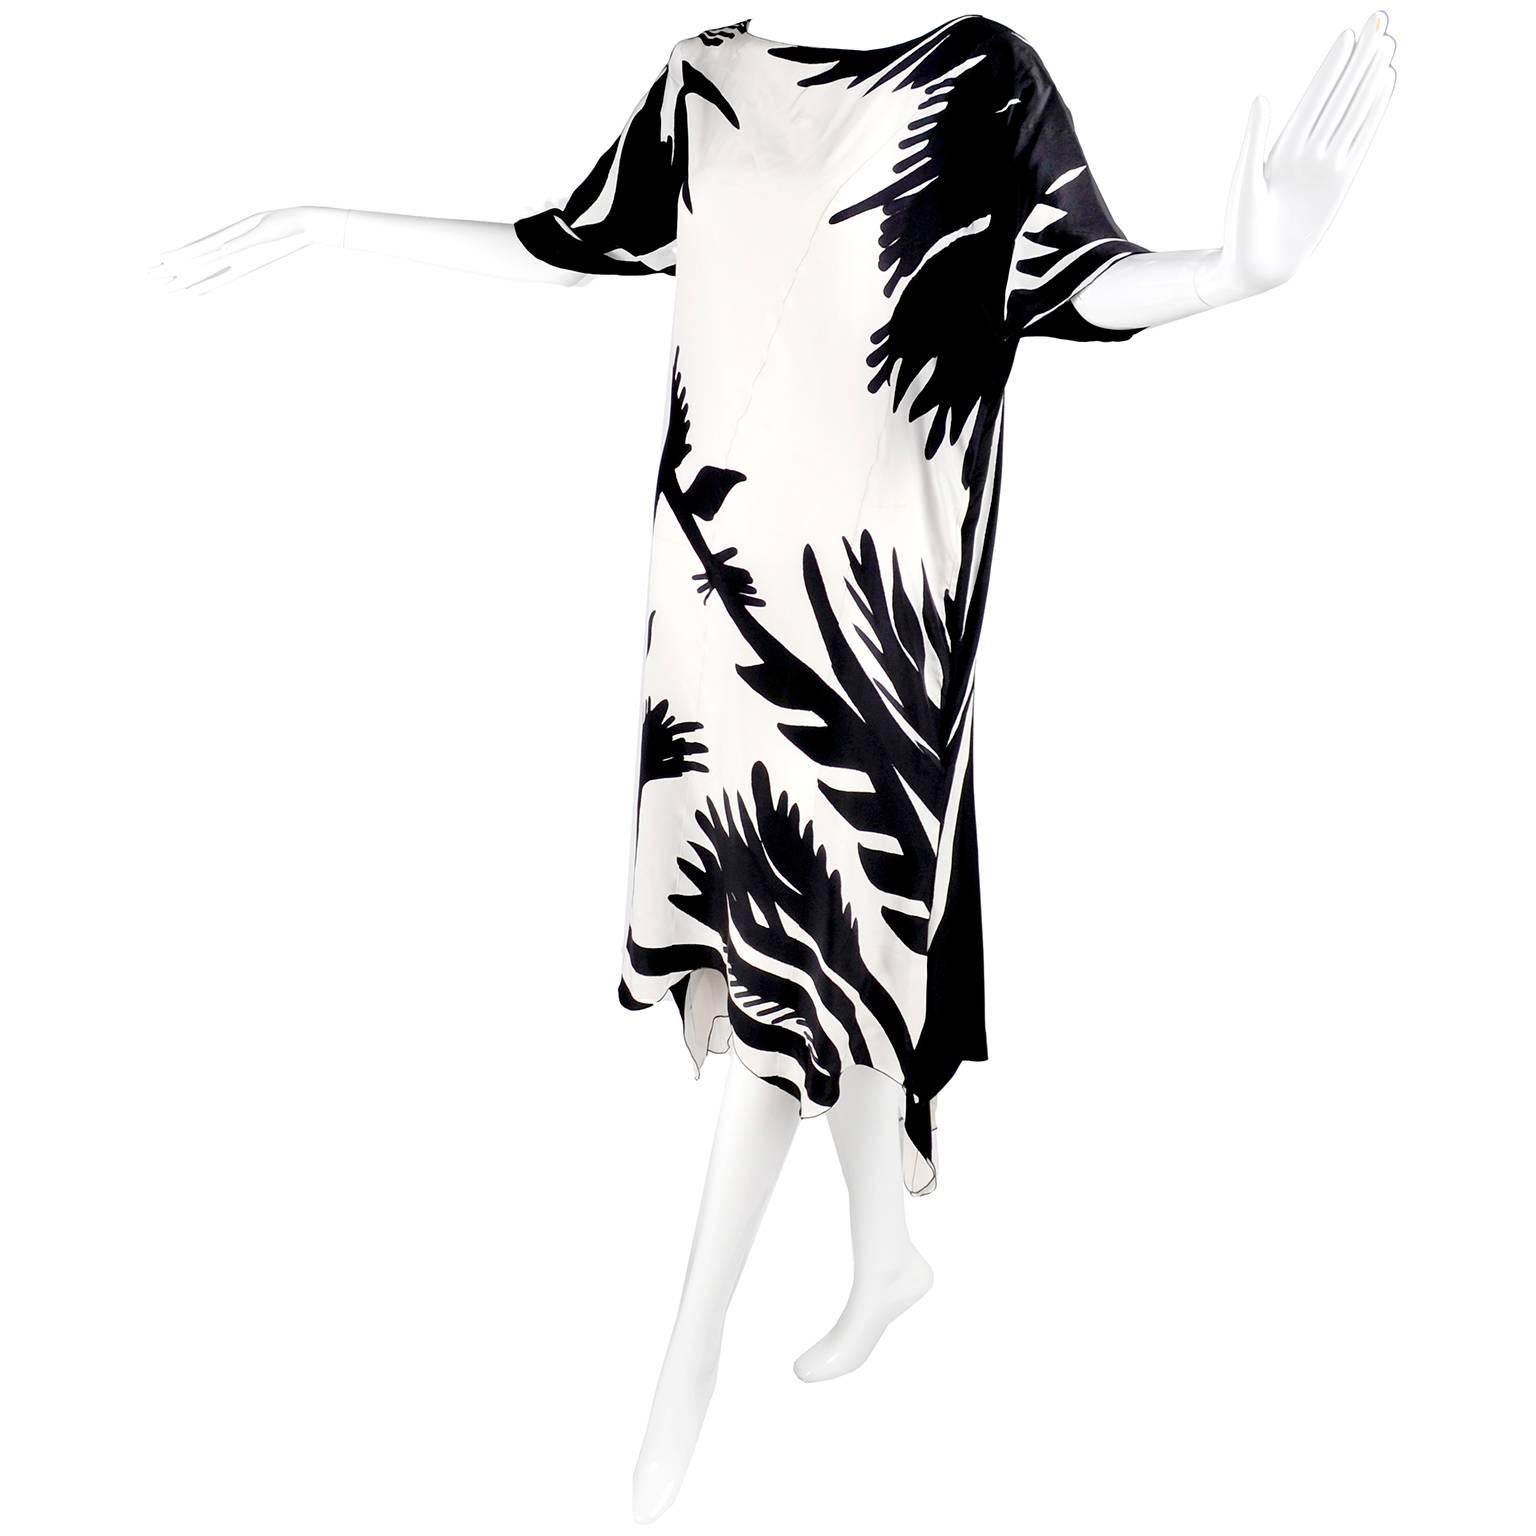 Vintage Caftan Dress in Black and White High Contrast Abstract Print im Zustand „Hervorragend“ in Portland, OR